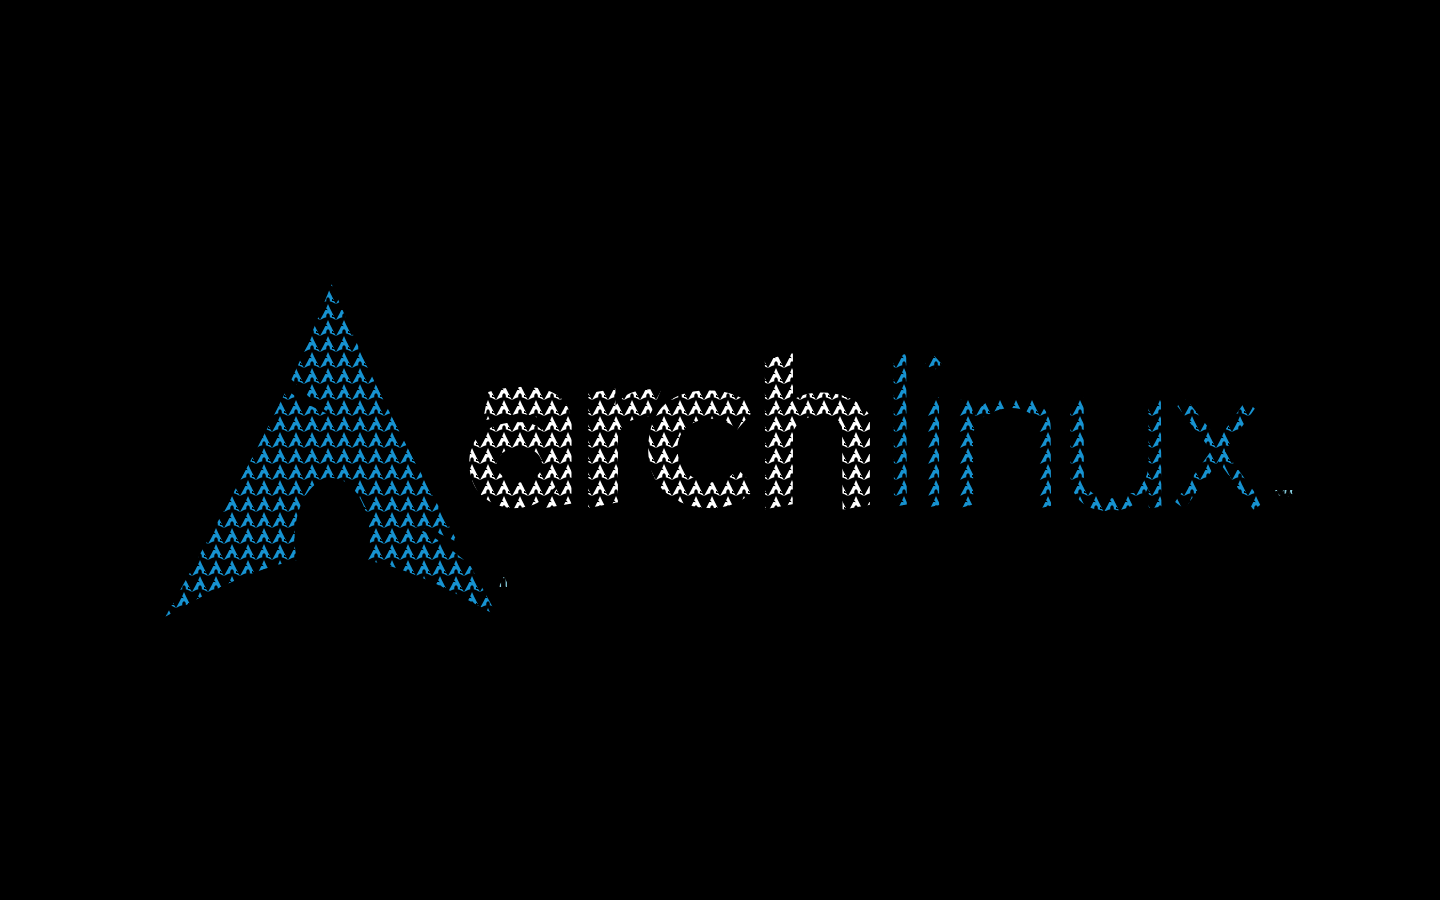 I made this Arch Linux wallpaper